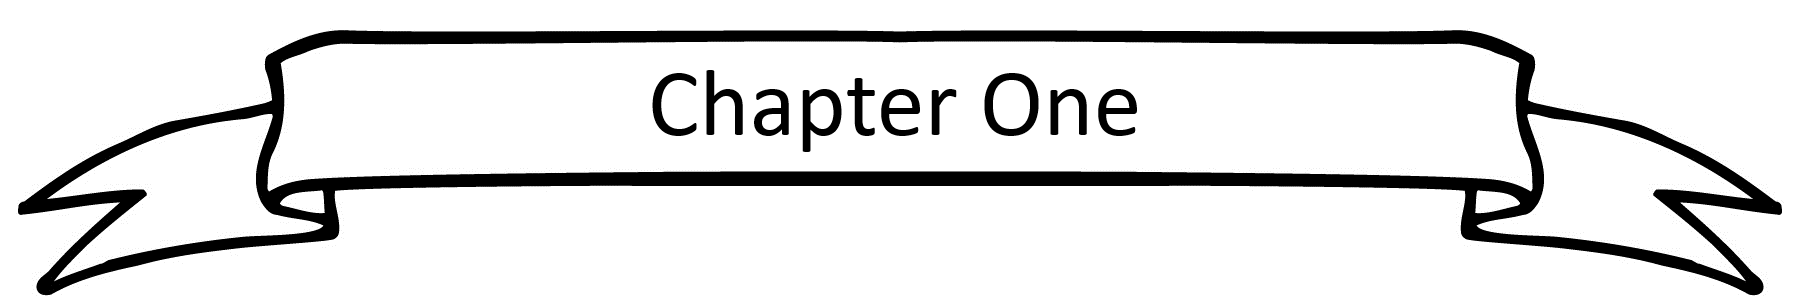 chapter one heading